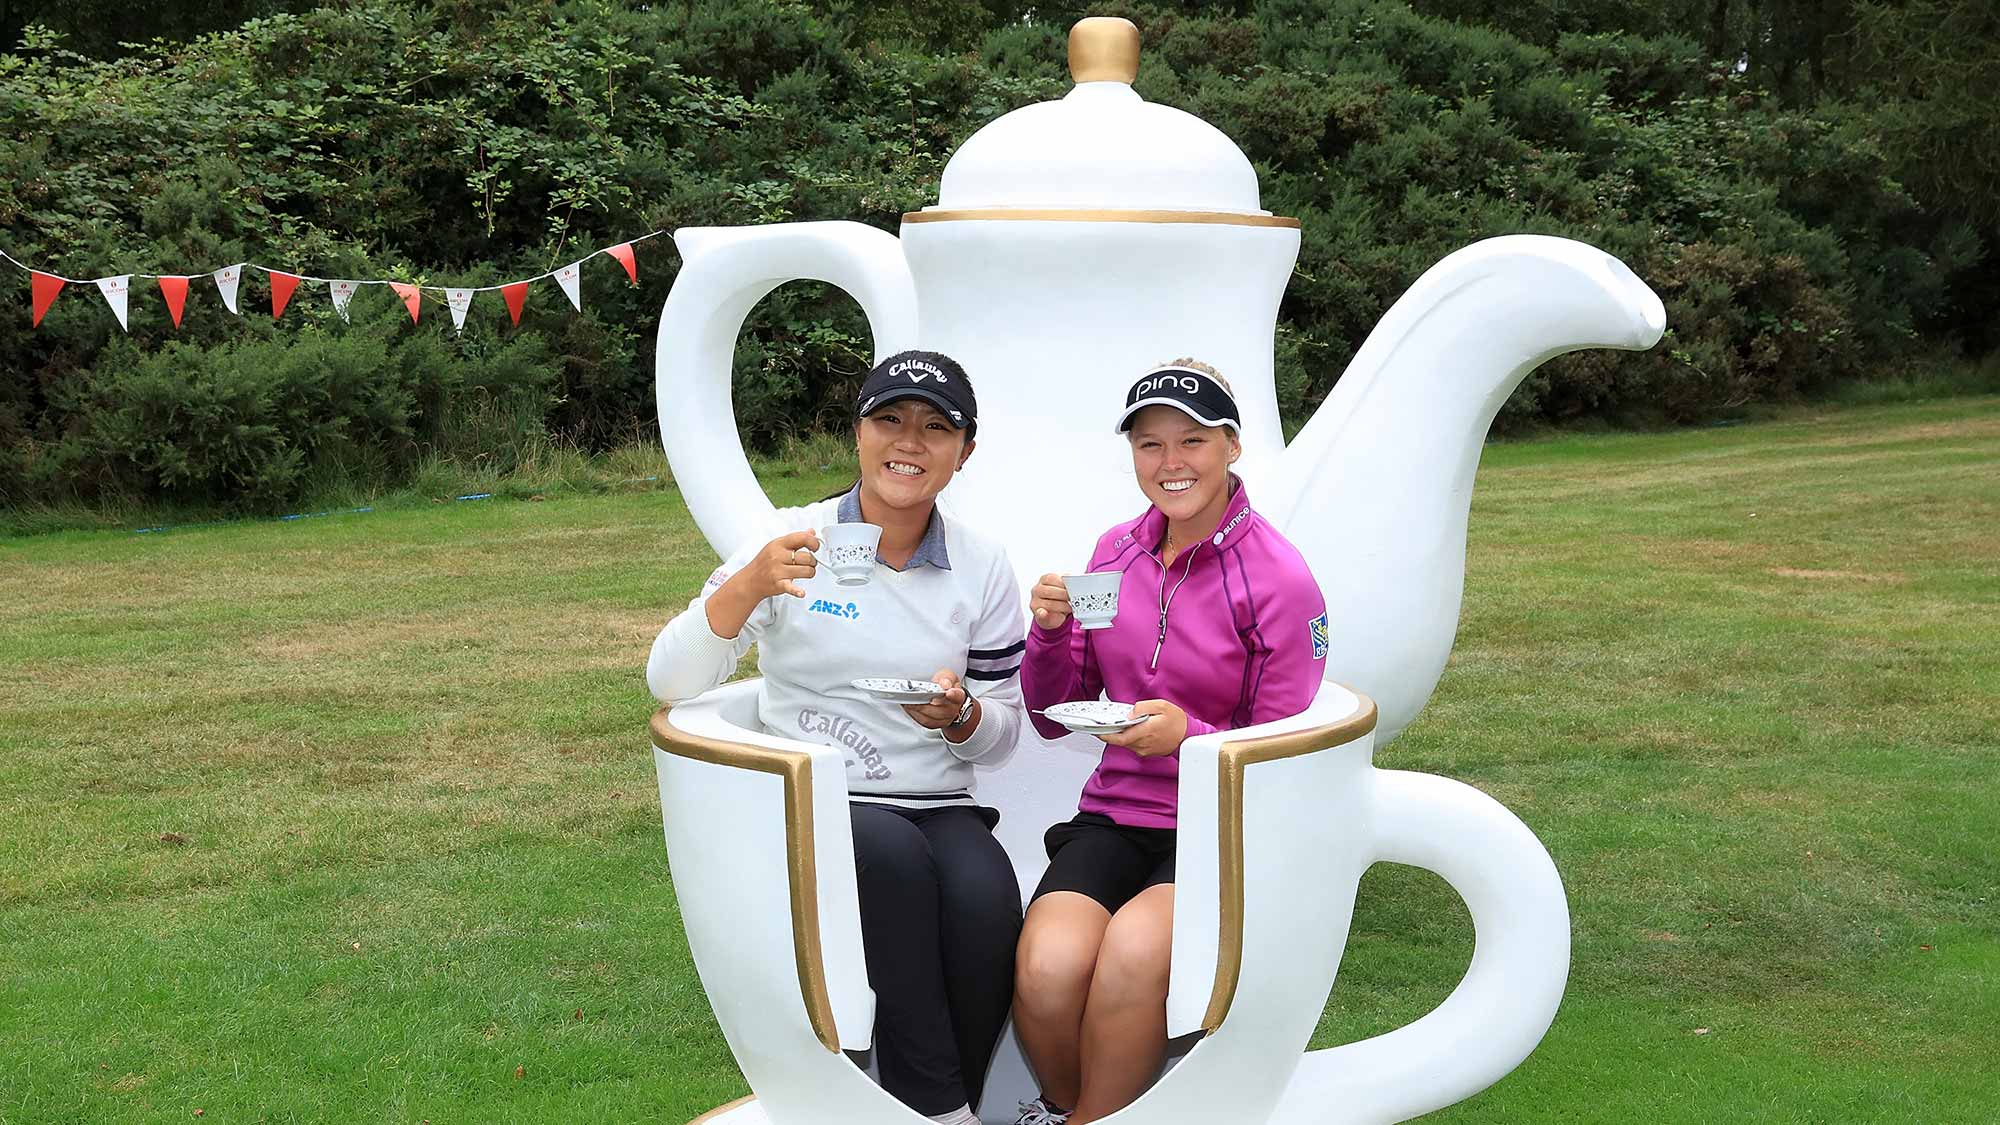 Lydia Ko of New Zealand and Brooke Henderson of Canada (R) attend a traditional English tea party hosted by Charley Hull of England at a photocall during a Pro-Am round ahead of the Ricoh Women's British Open